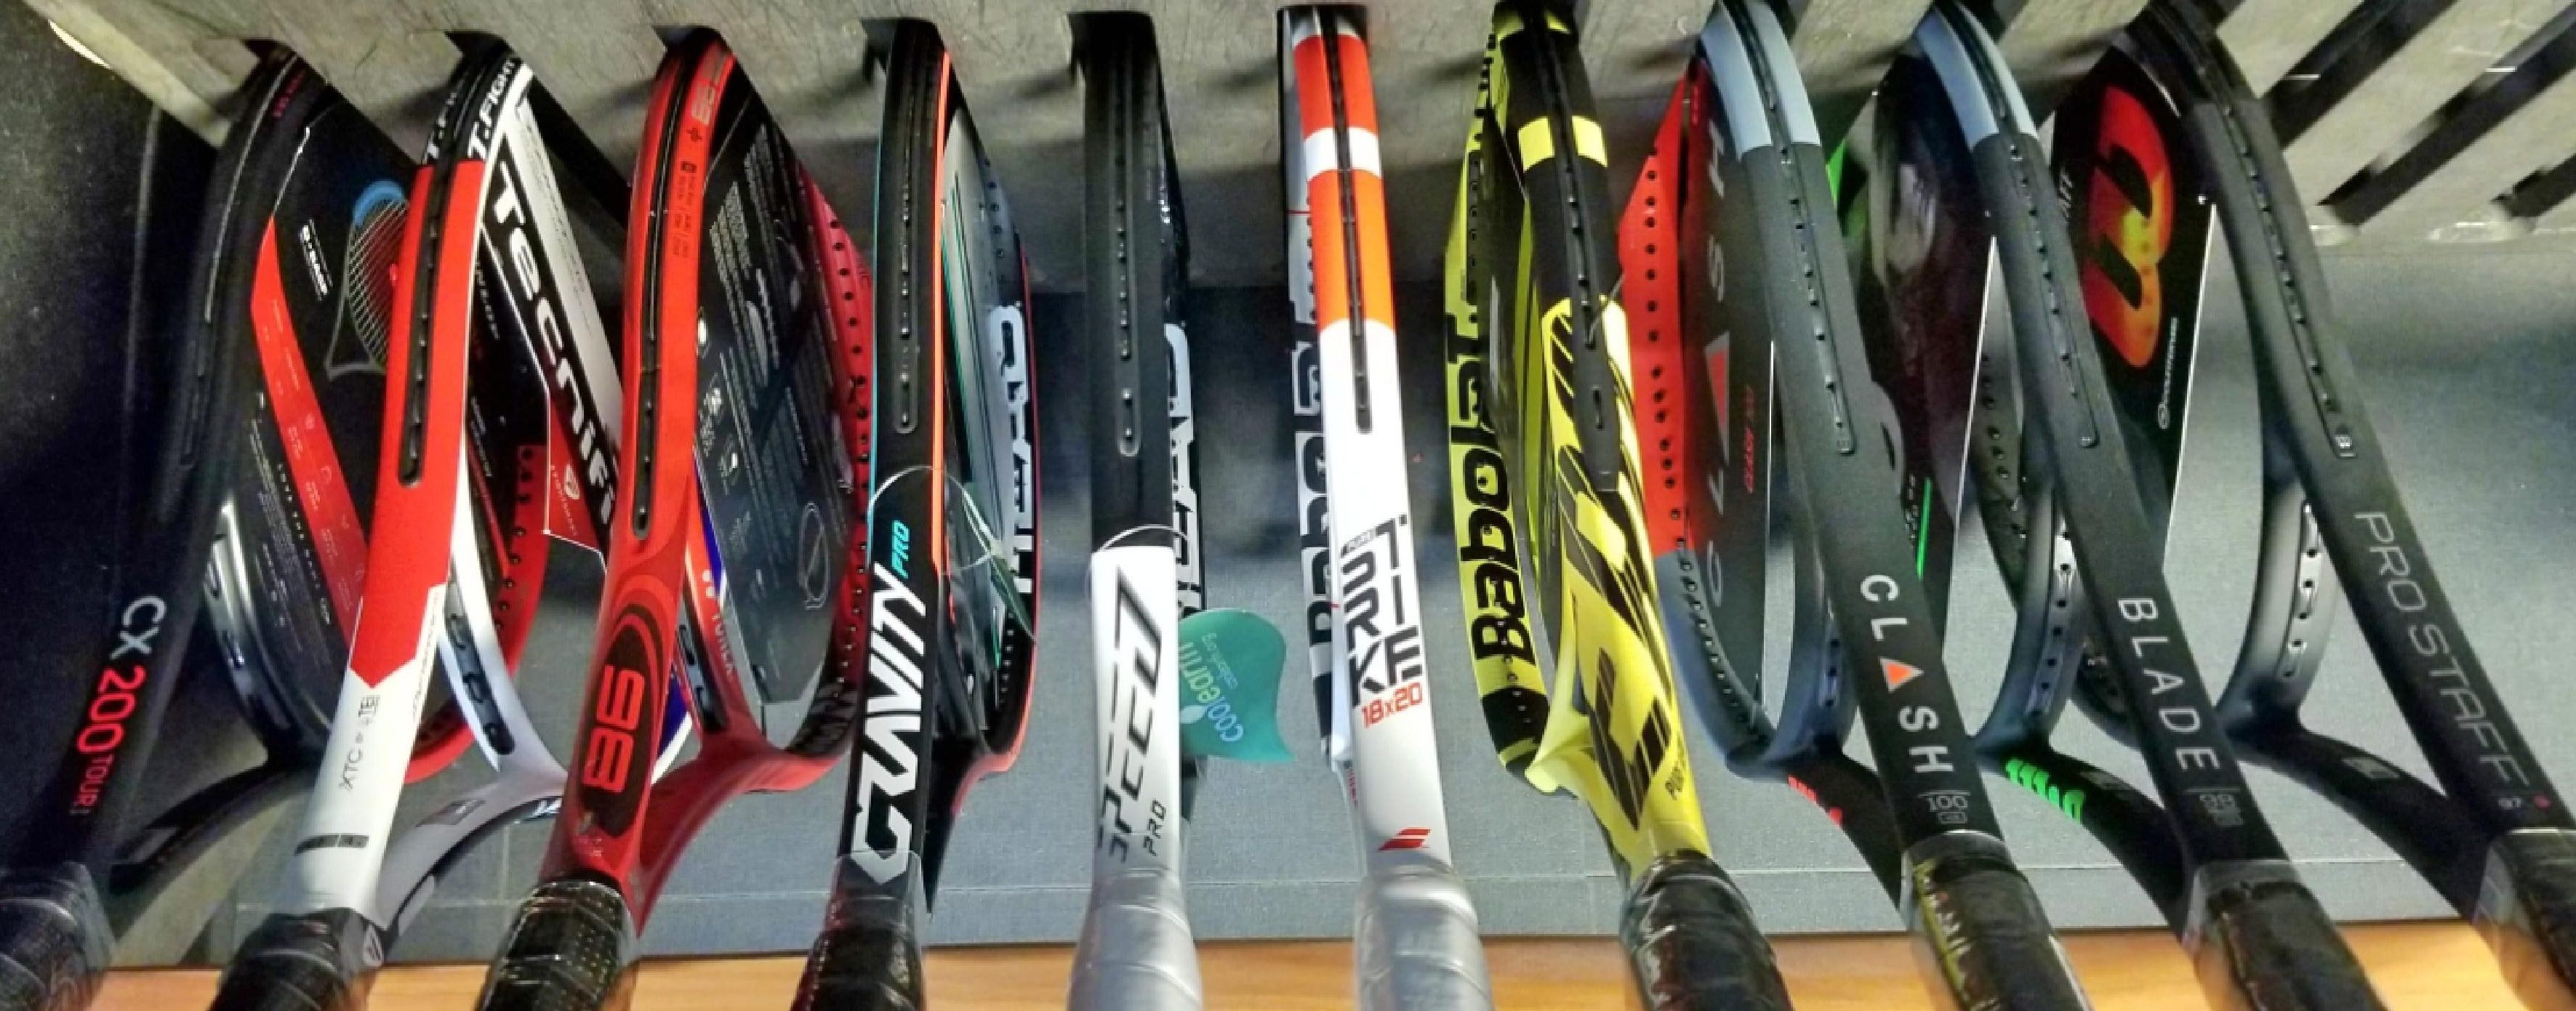 Top 10 Tennis Racquets To Raise Your Game